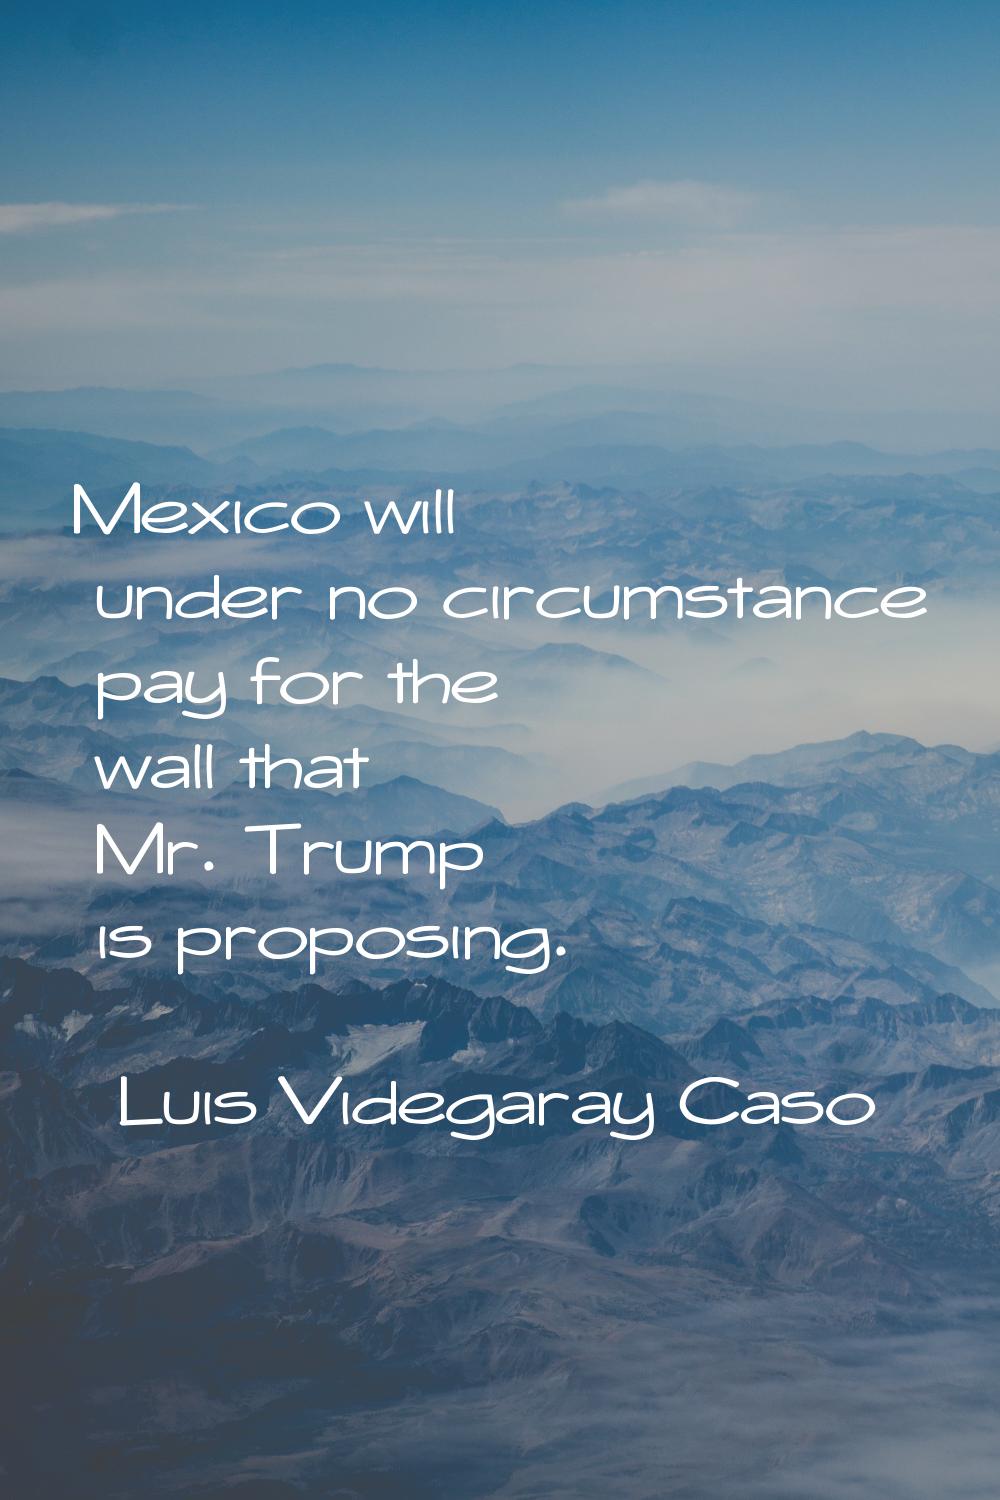 Mexico will under no circumstance pay for the wall that Mr. Trump is proposing.